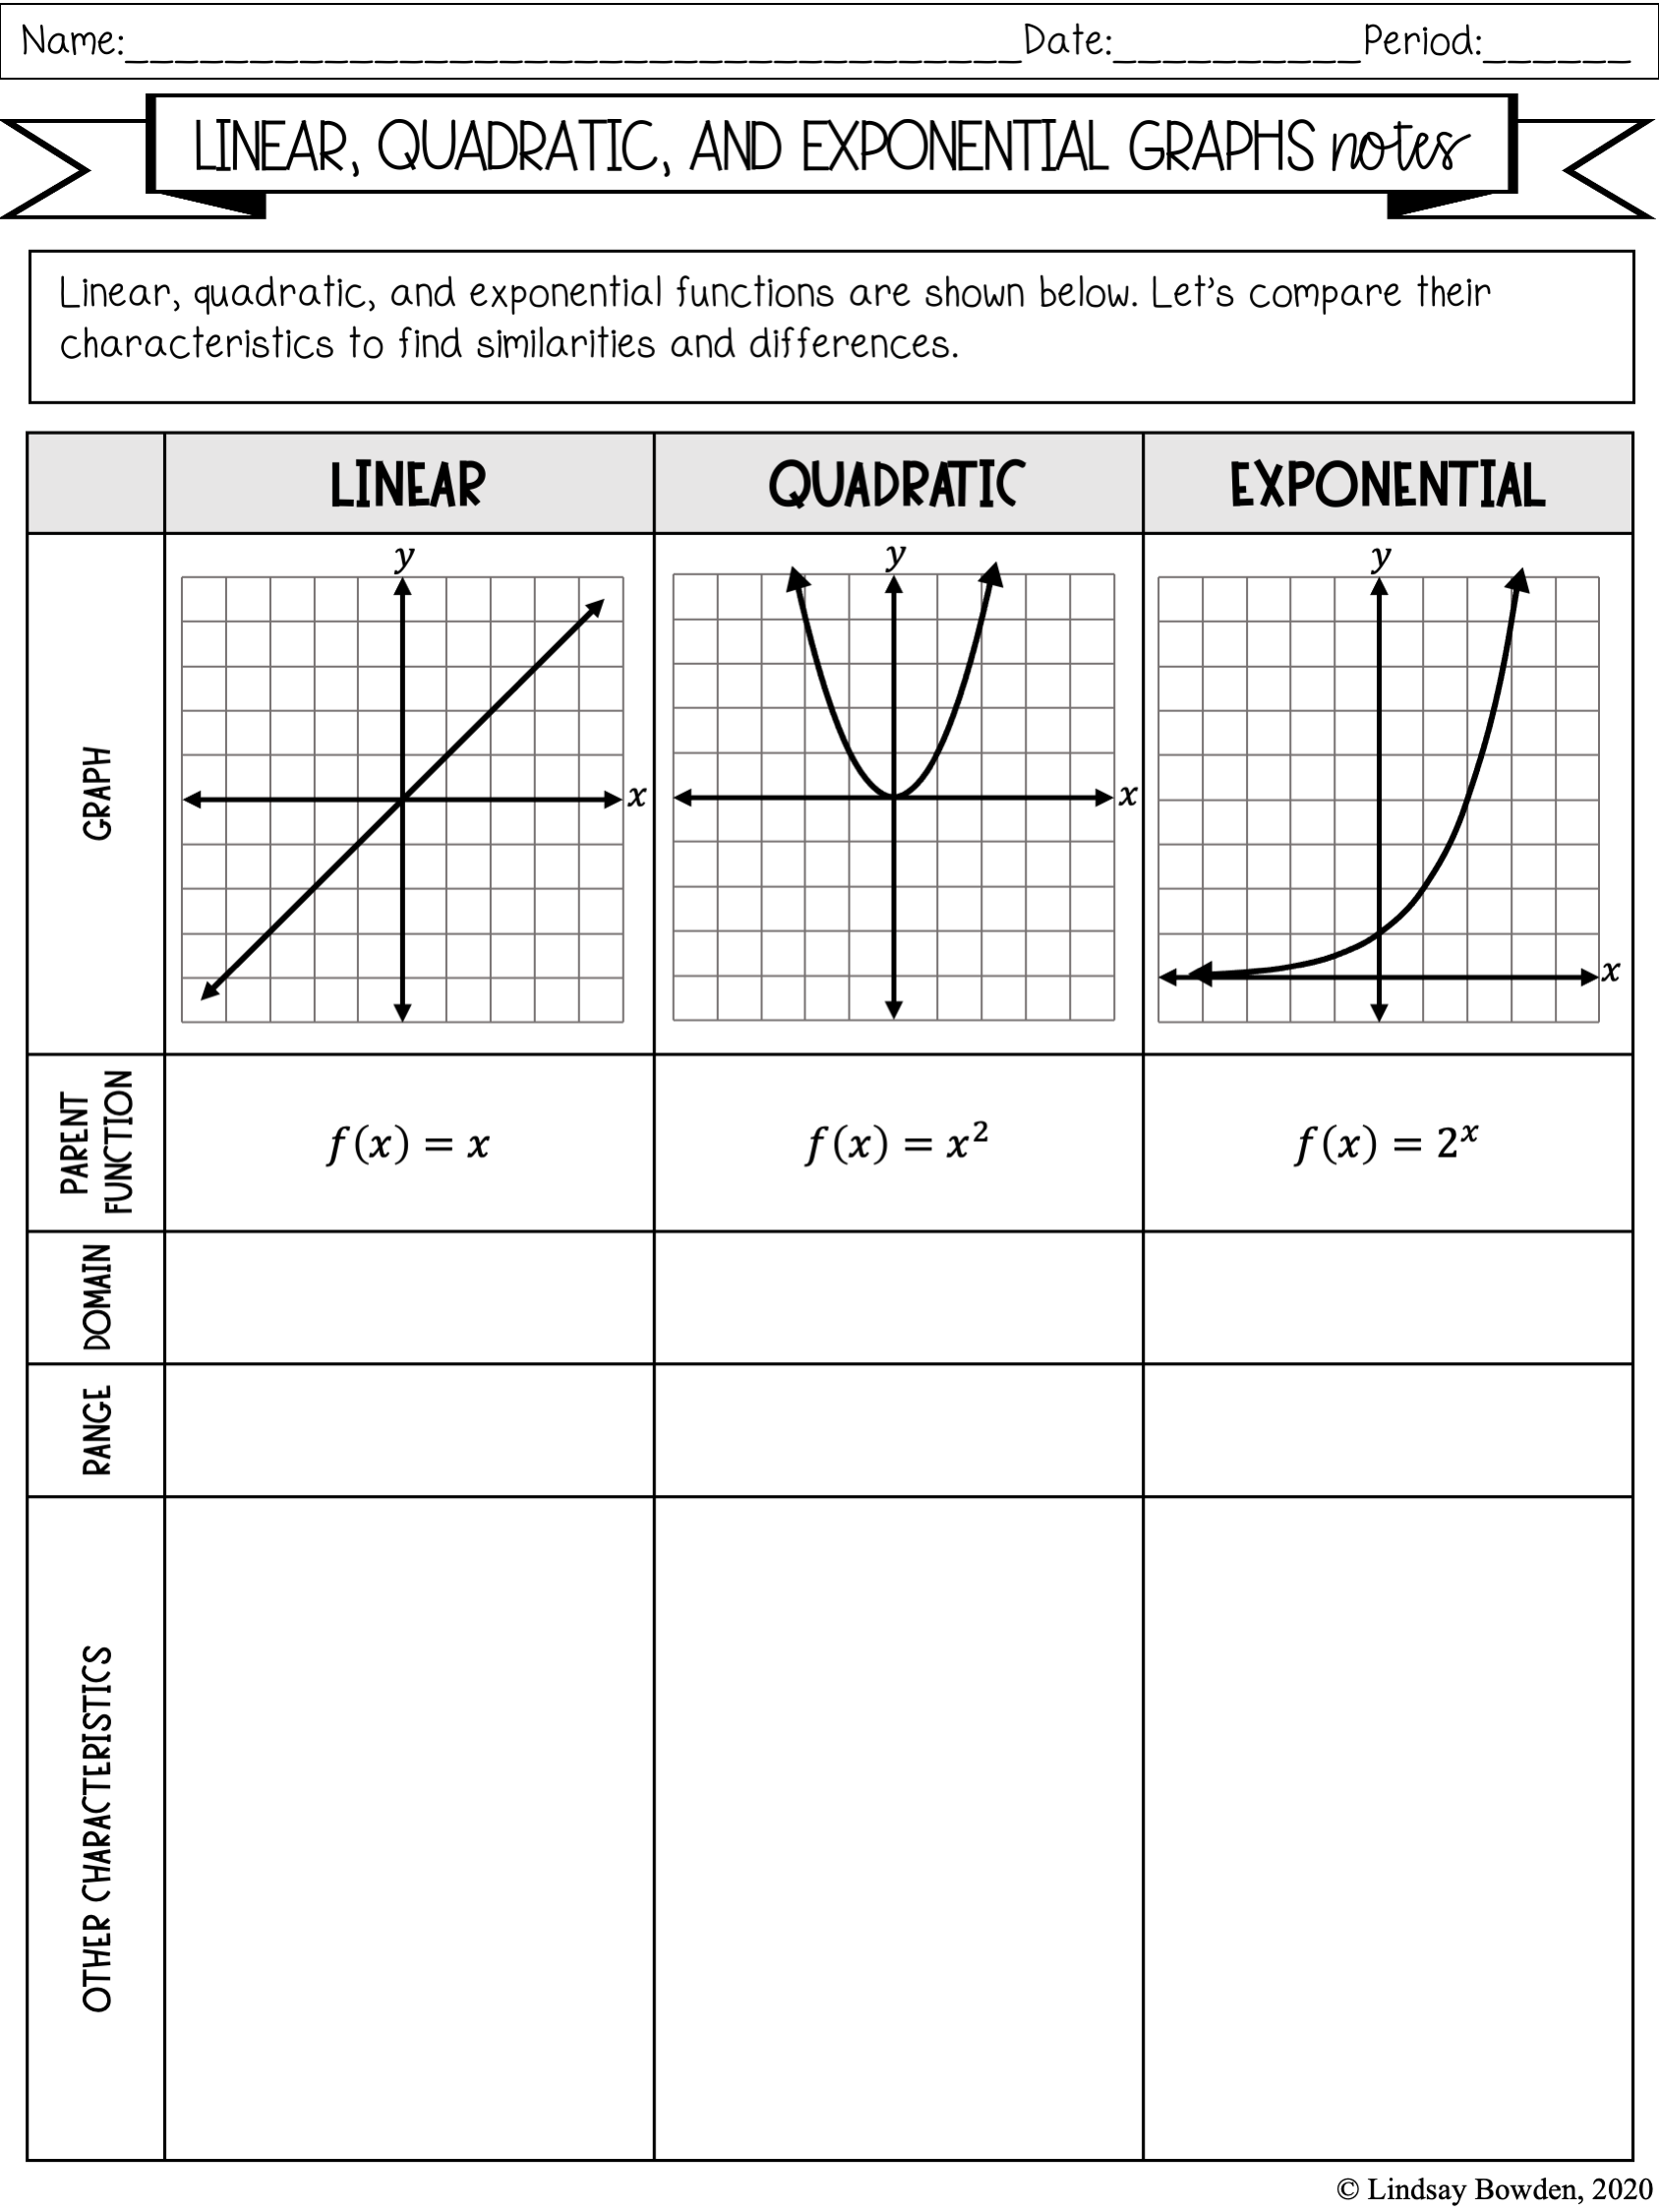 Linear, Quadratic, Exponential Notes and Worksheets - Lindsay Bowden With From Linear To Quadratic Worksheet